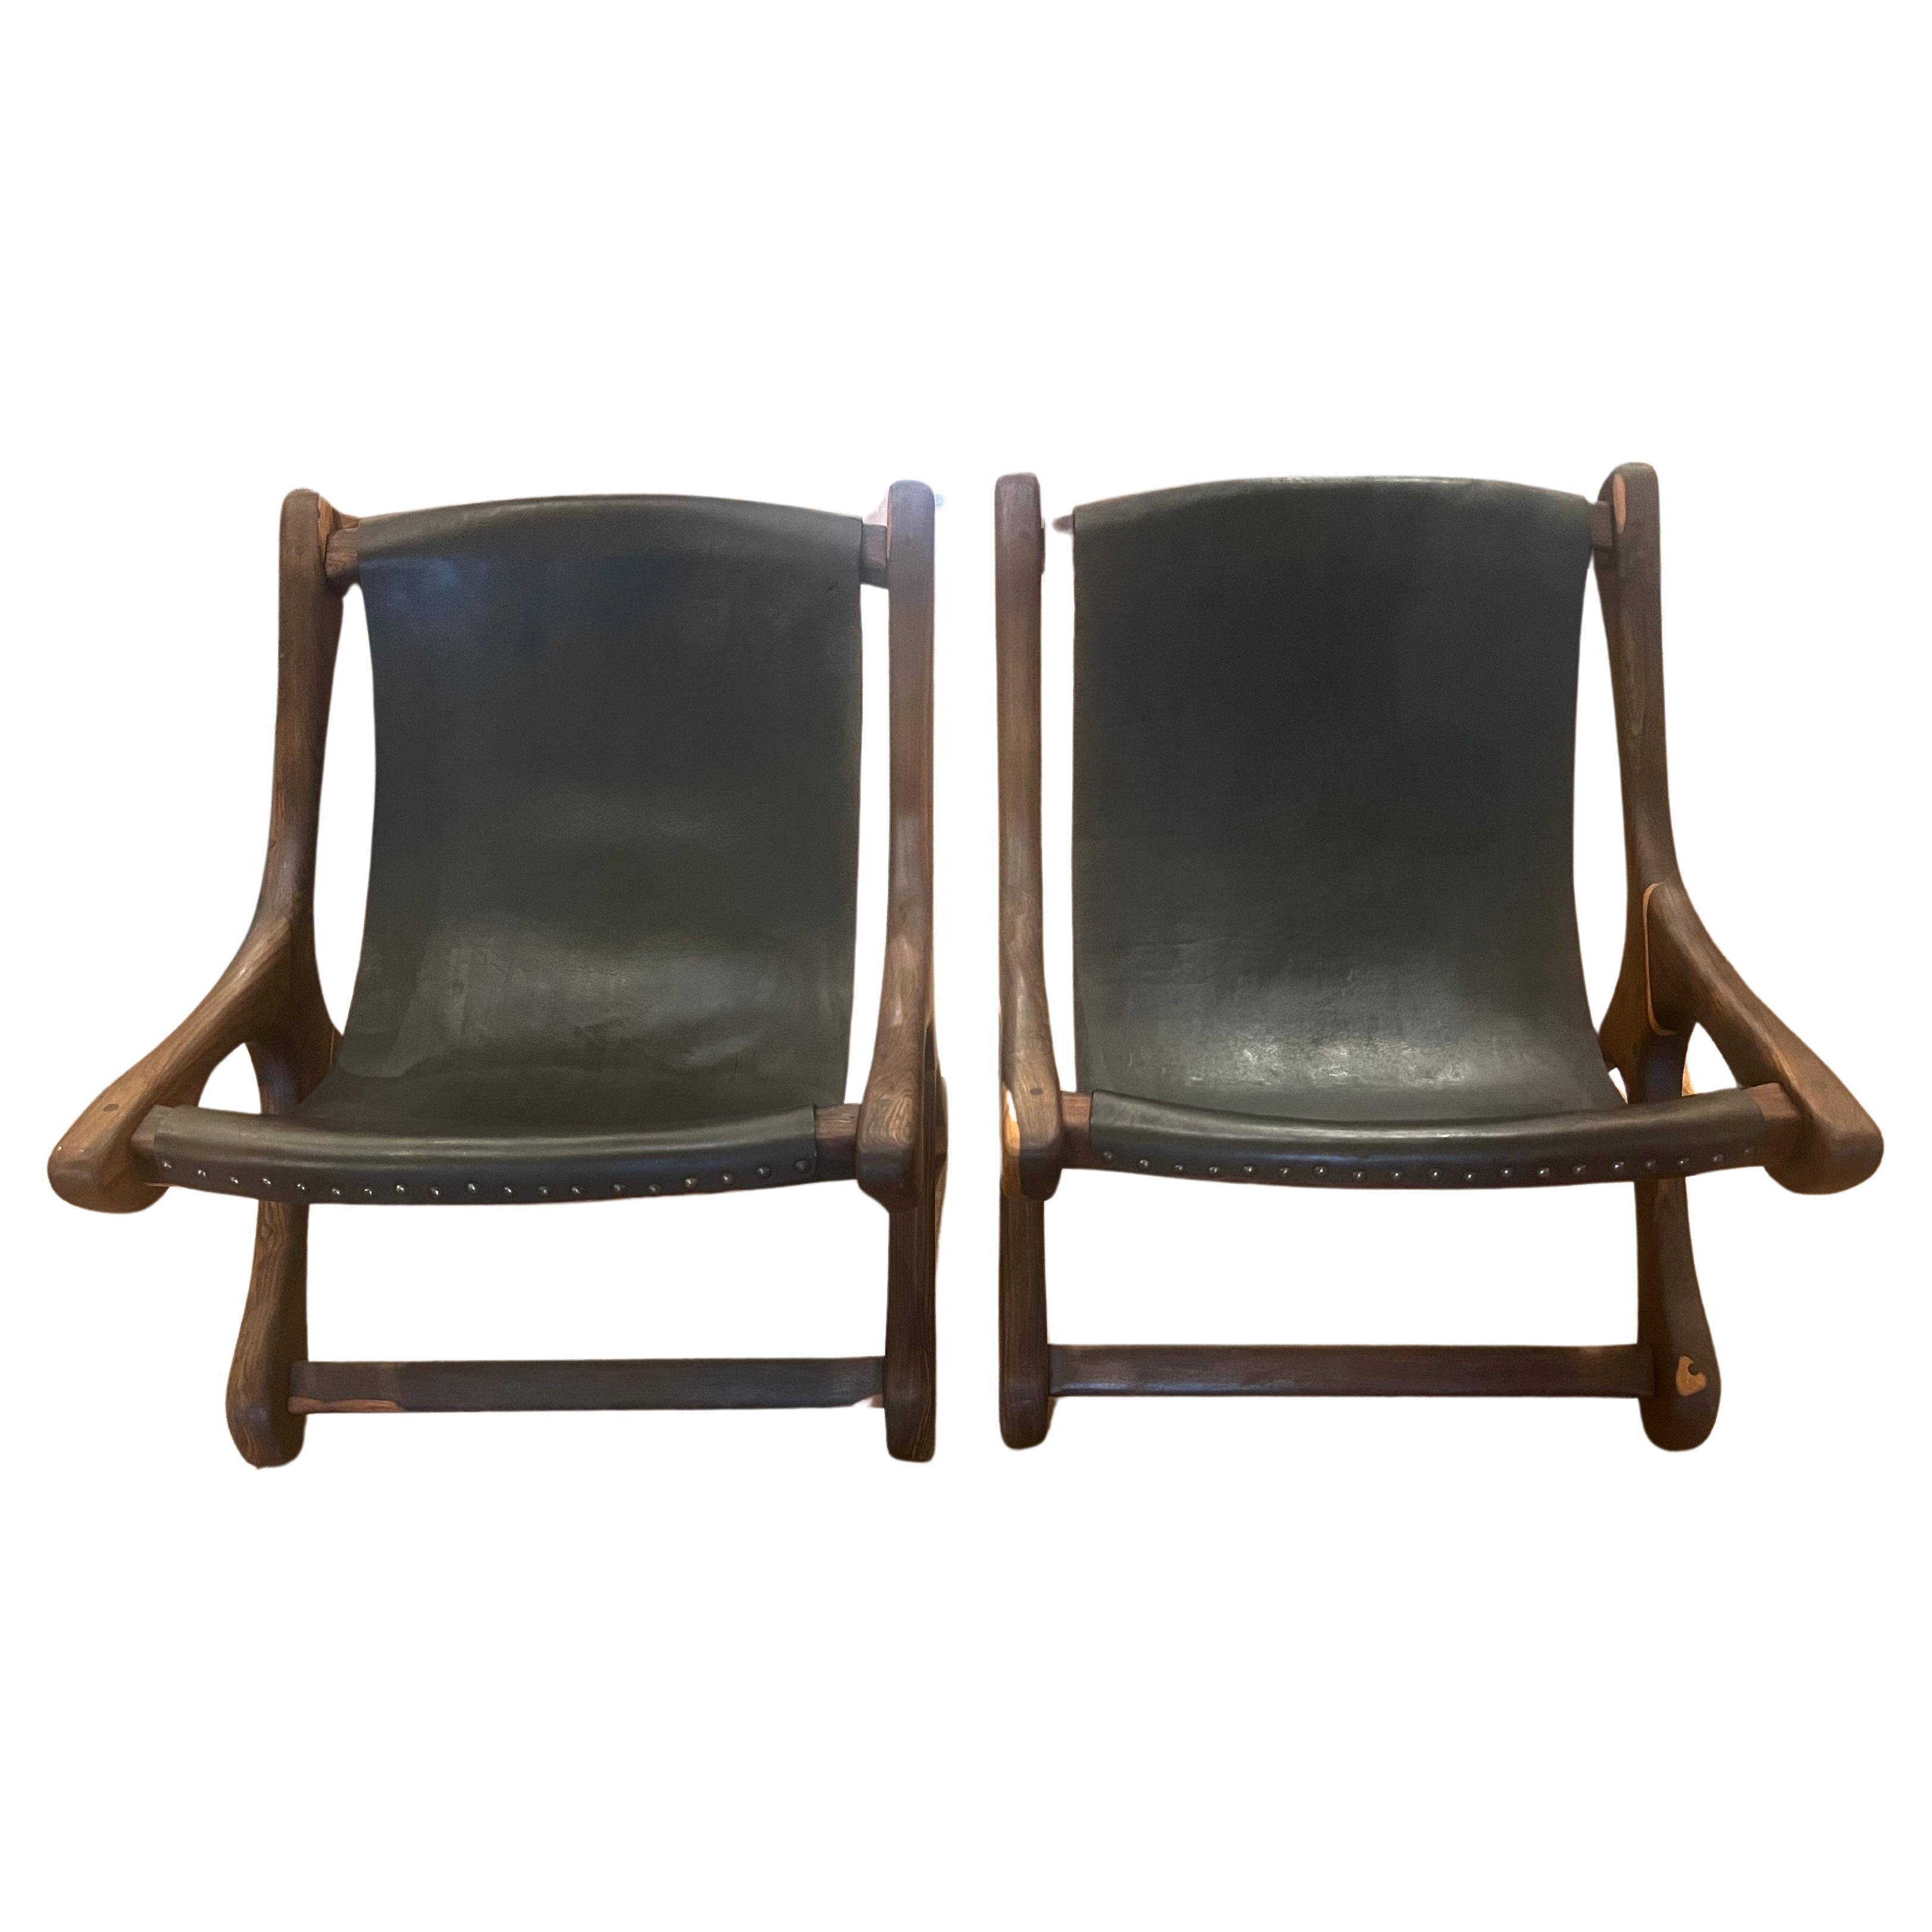 A unique and beautiful pair of solid rosewood chairs, designed by Don Shoemaker Mexican Modernism, circa 1950s freshly restored great condition nice leather and wood refinished.